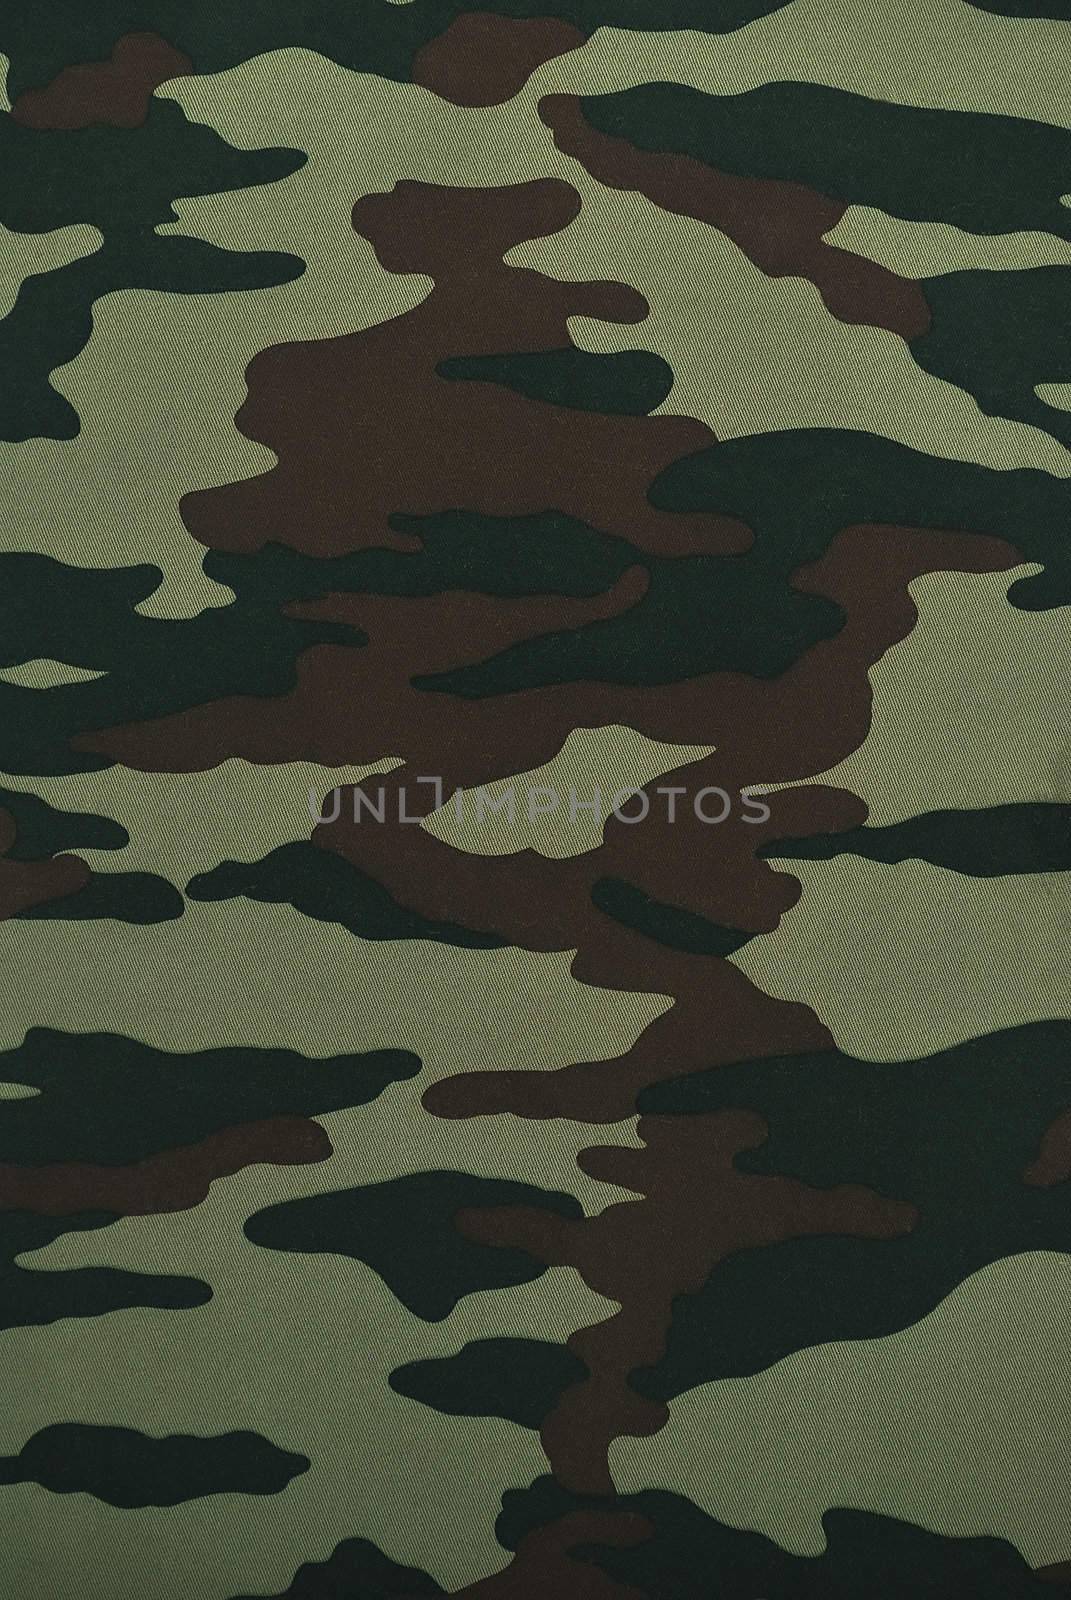 Camouflage fabric by vetkit